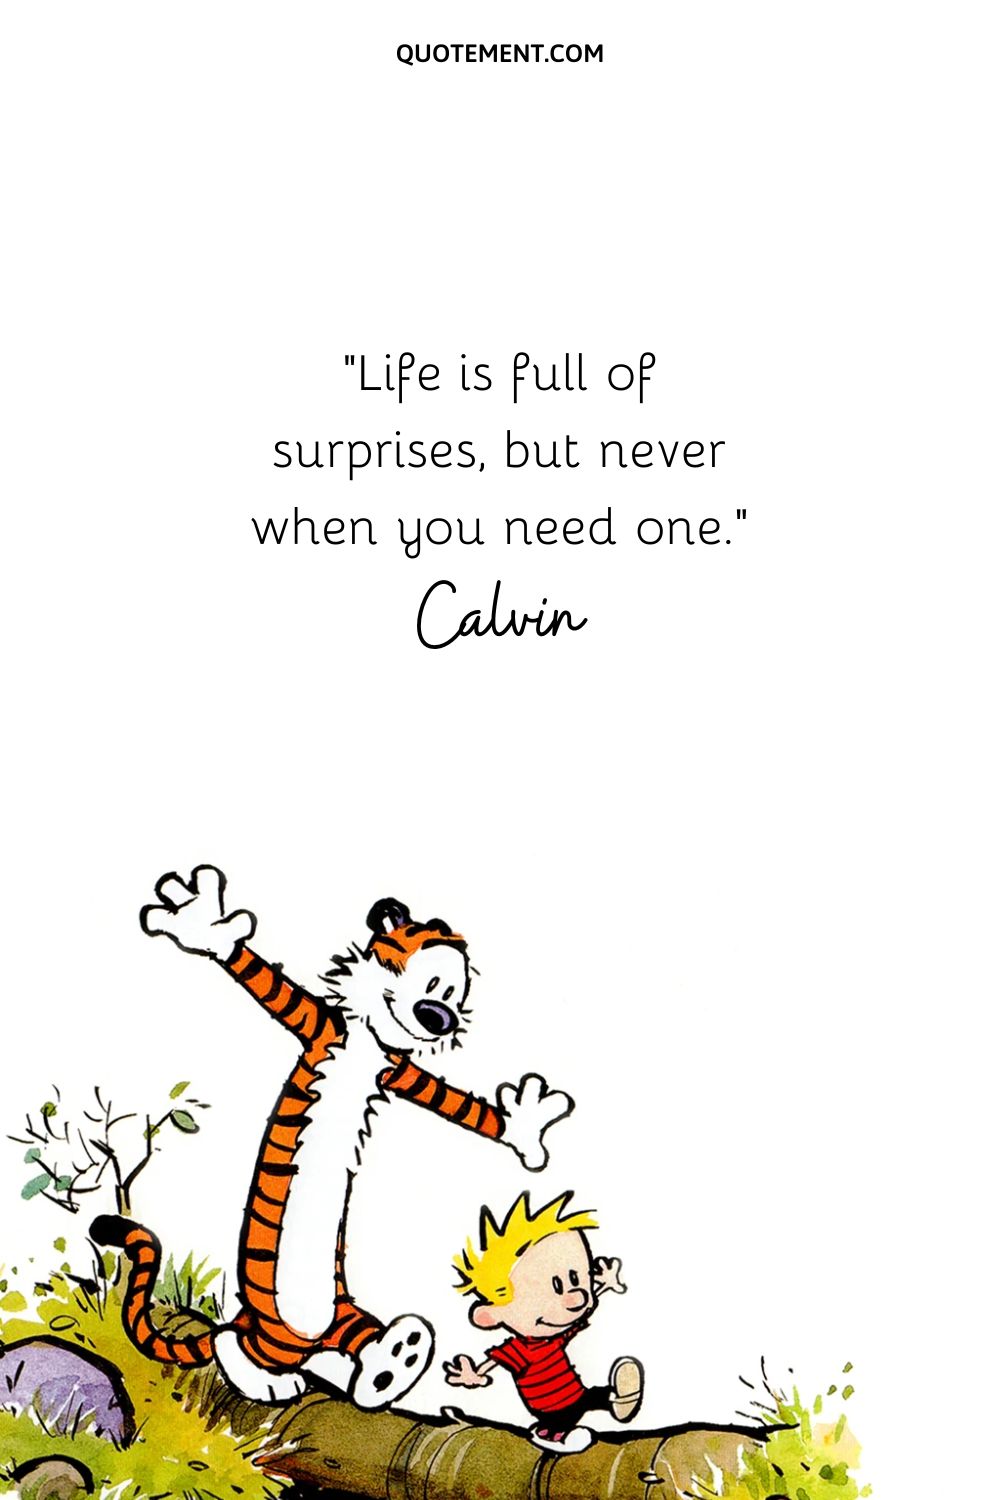 Life is full of surprises, but never when you need one.